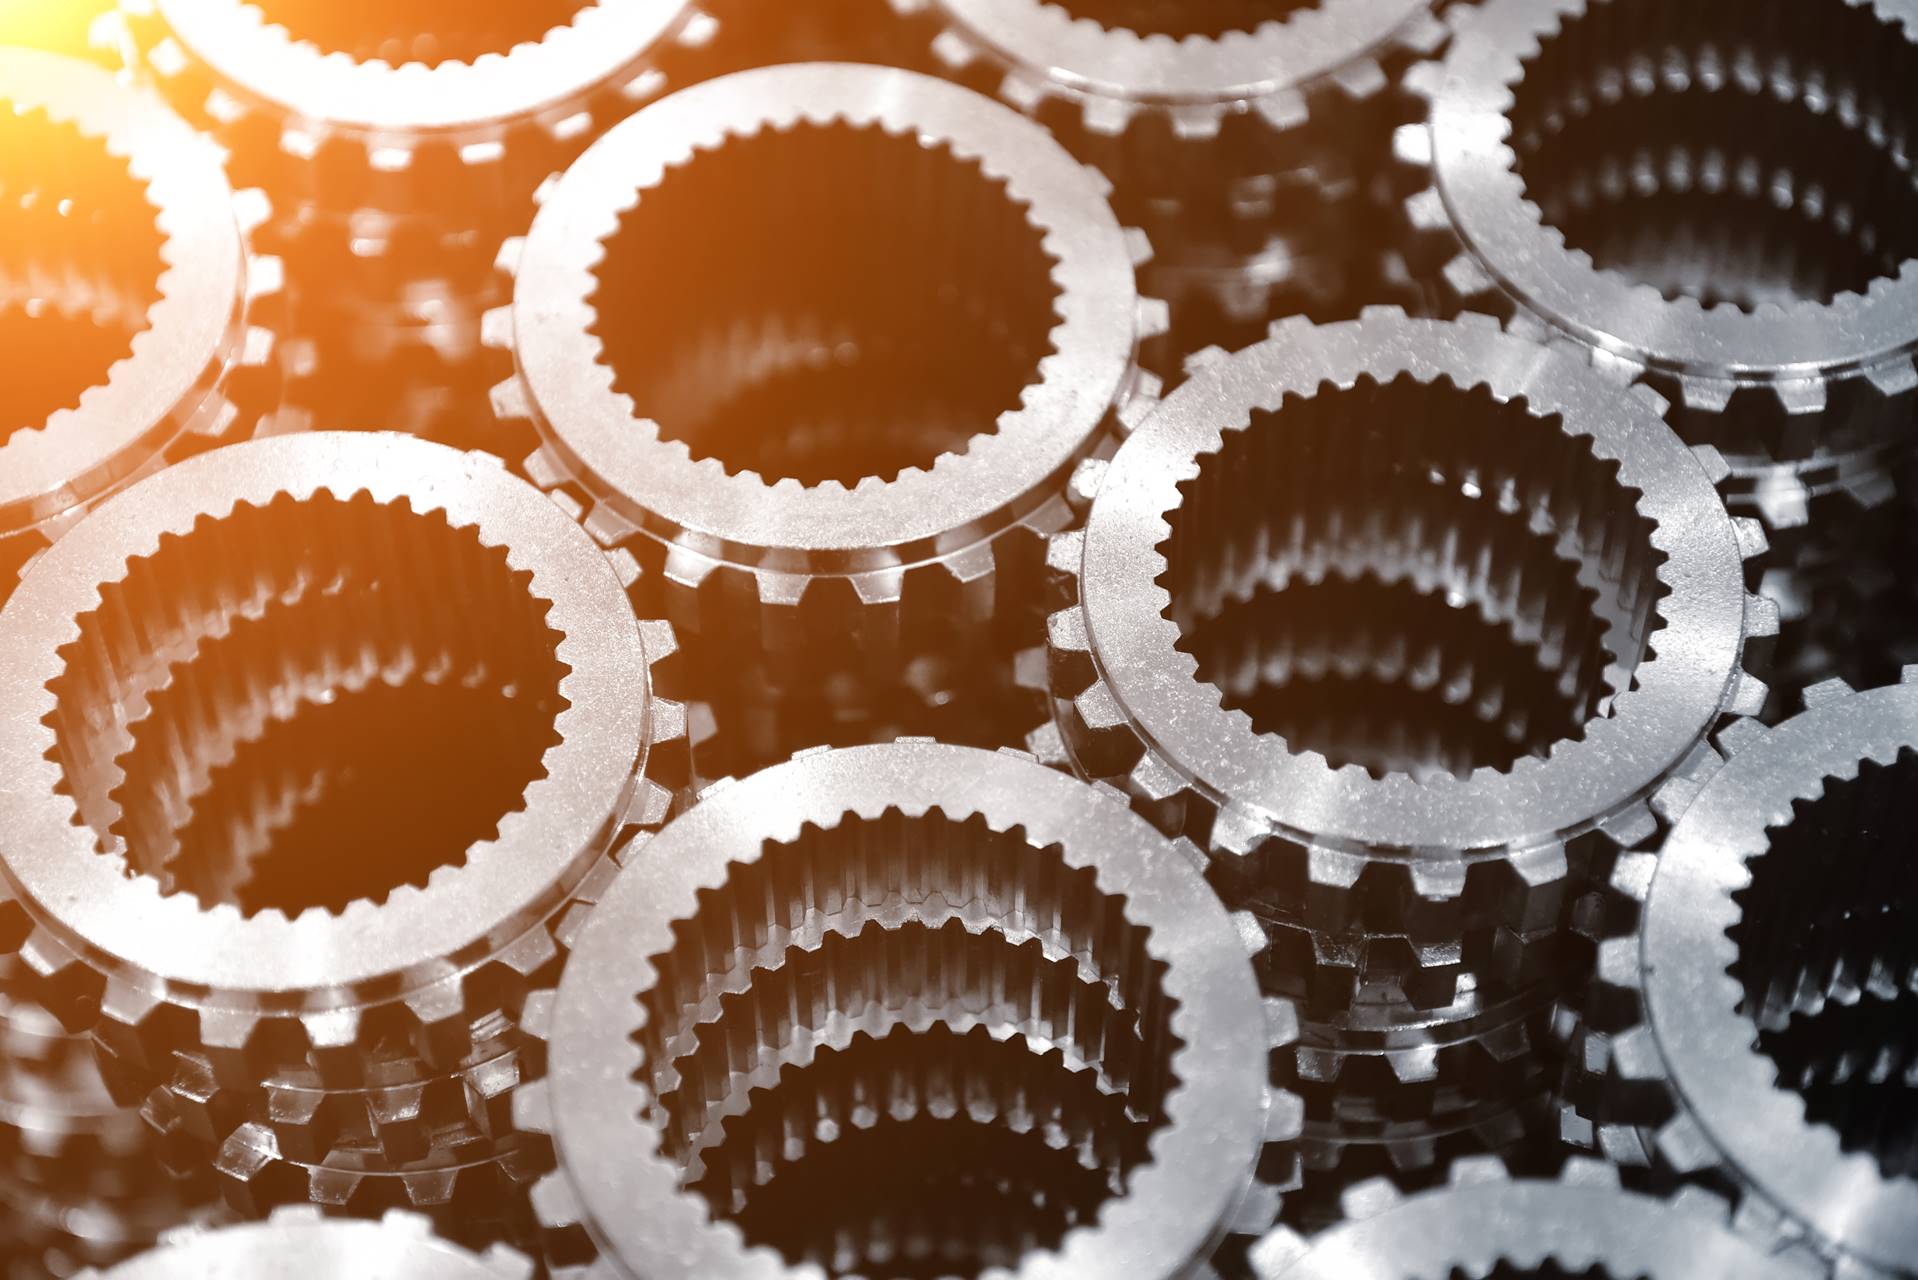 Gear shaping – The manufacturing of gears